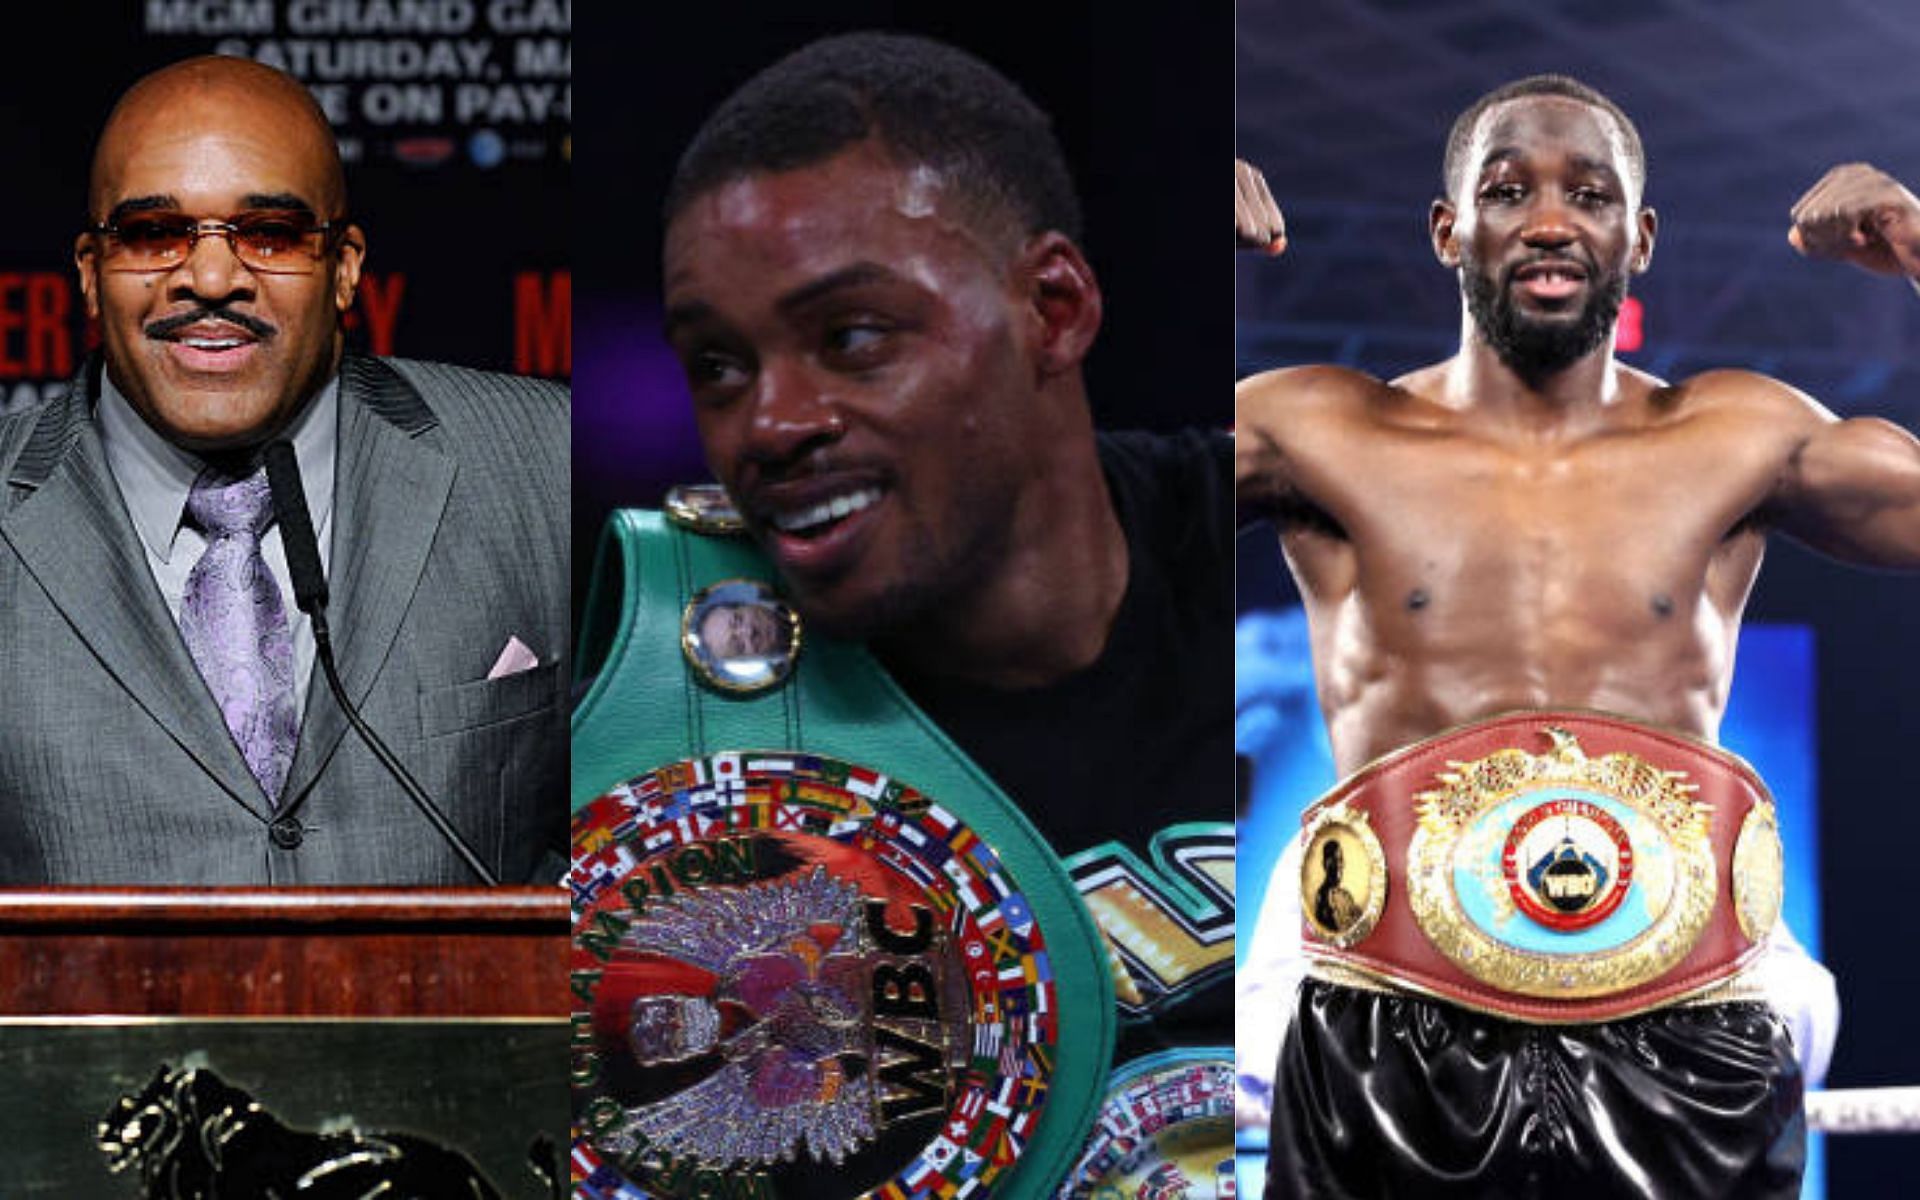 Leonard Ellerbe (left), Errol Spence Jr. (center), and Terence Crawford (right) (Image credits Getty)